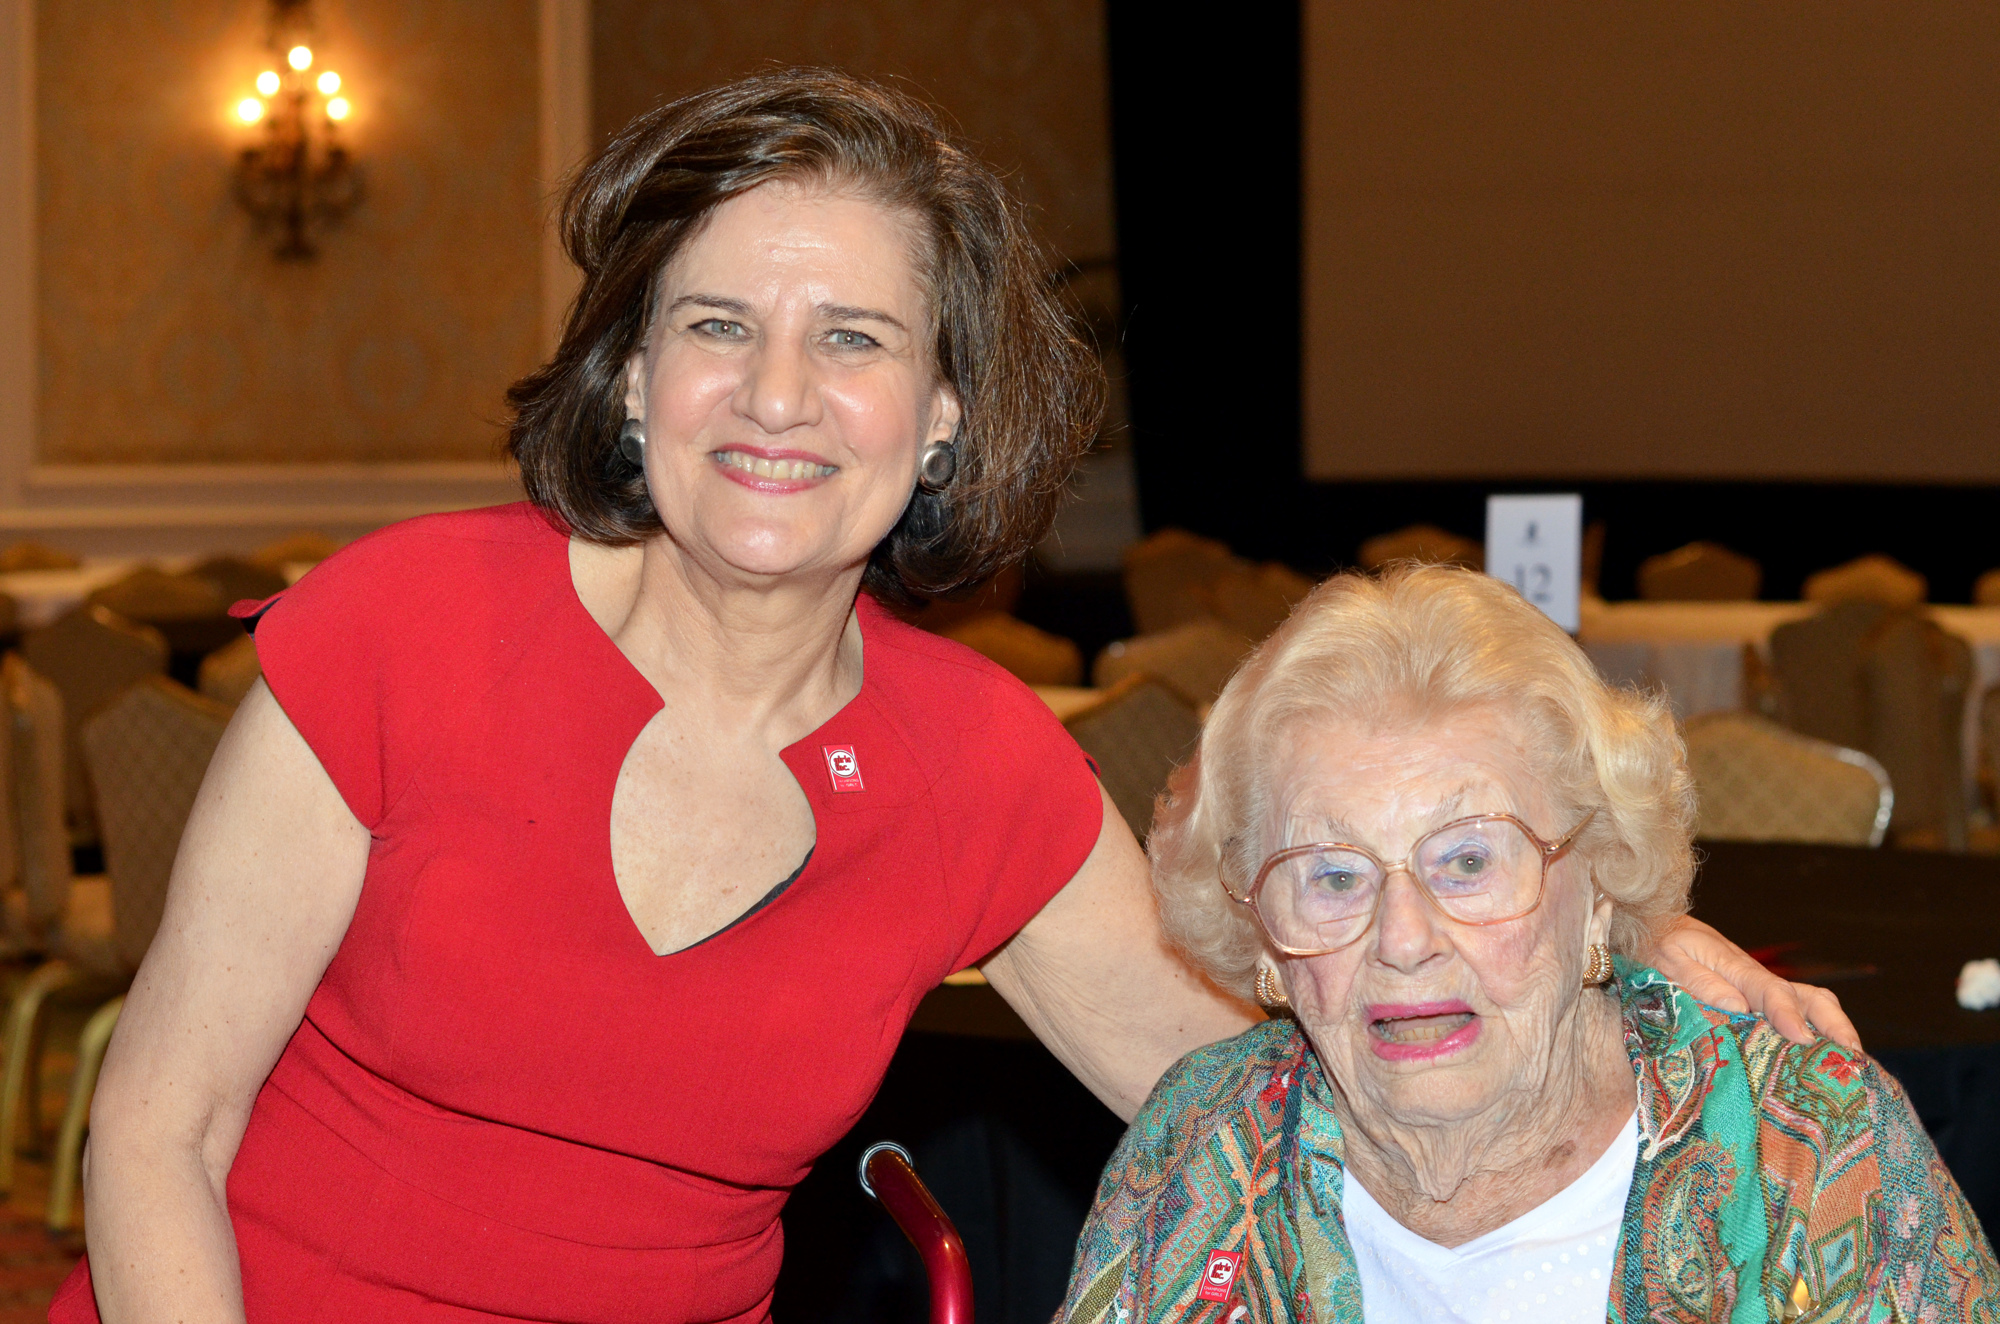 Judy Vrendenburgh and Donna Brace Ogilvie at last year's Girls Inc. Celebration Luncheon 'Fuel Her Fire.' Photo by Heather Merriman Saba